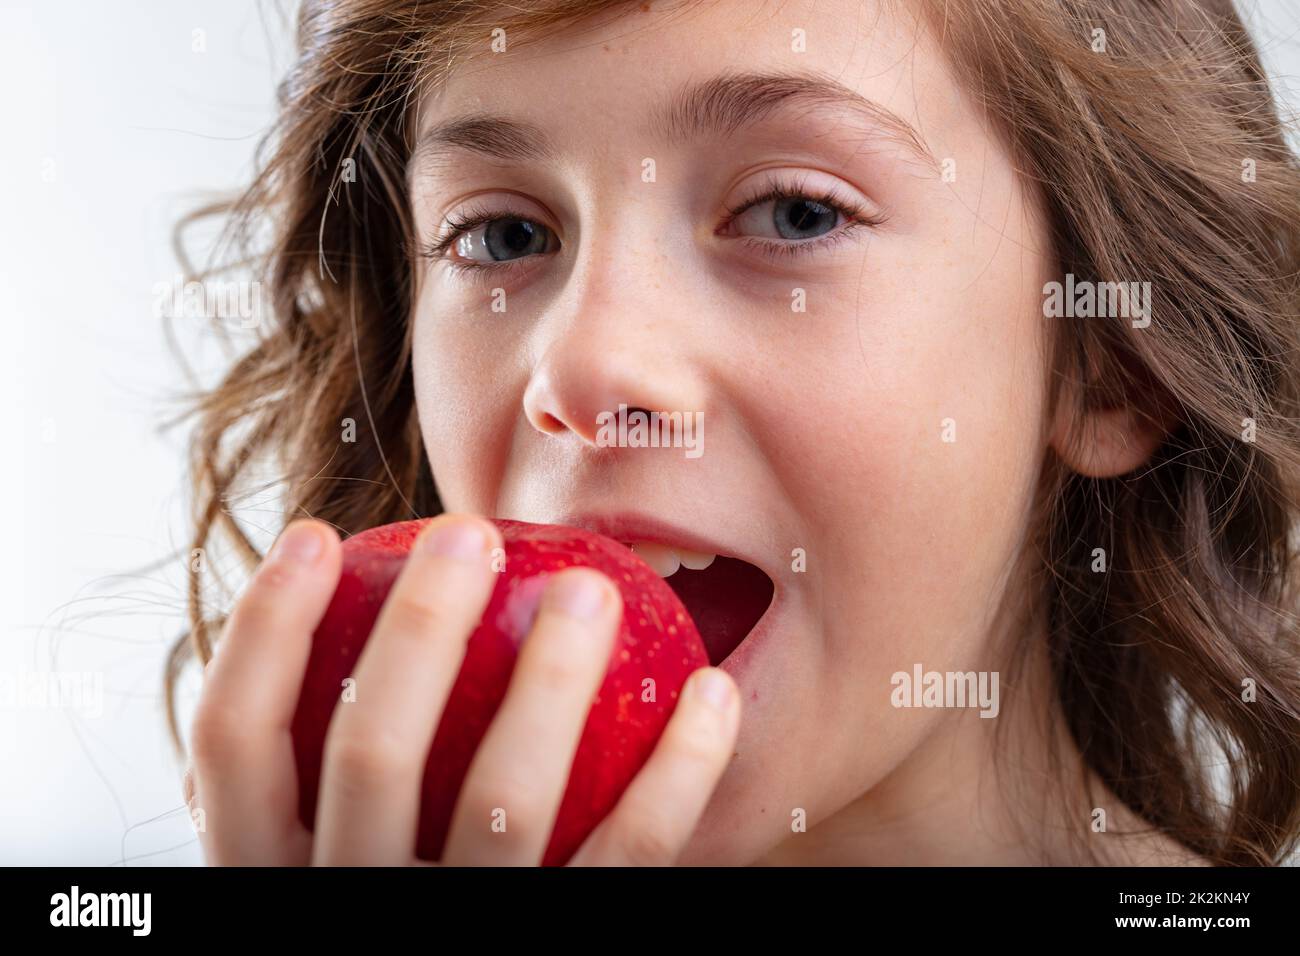 Young schoolgirl about to bite into a luscious red apple Stock Photo